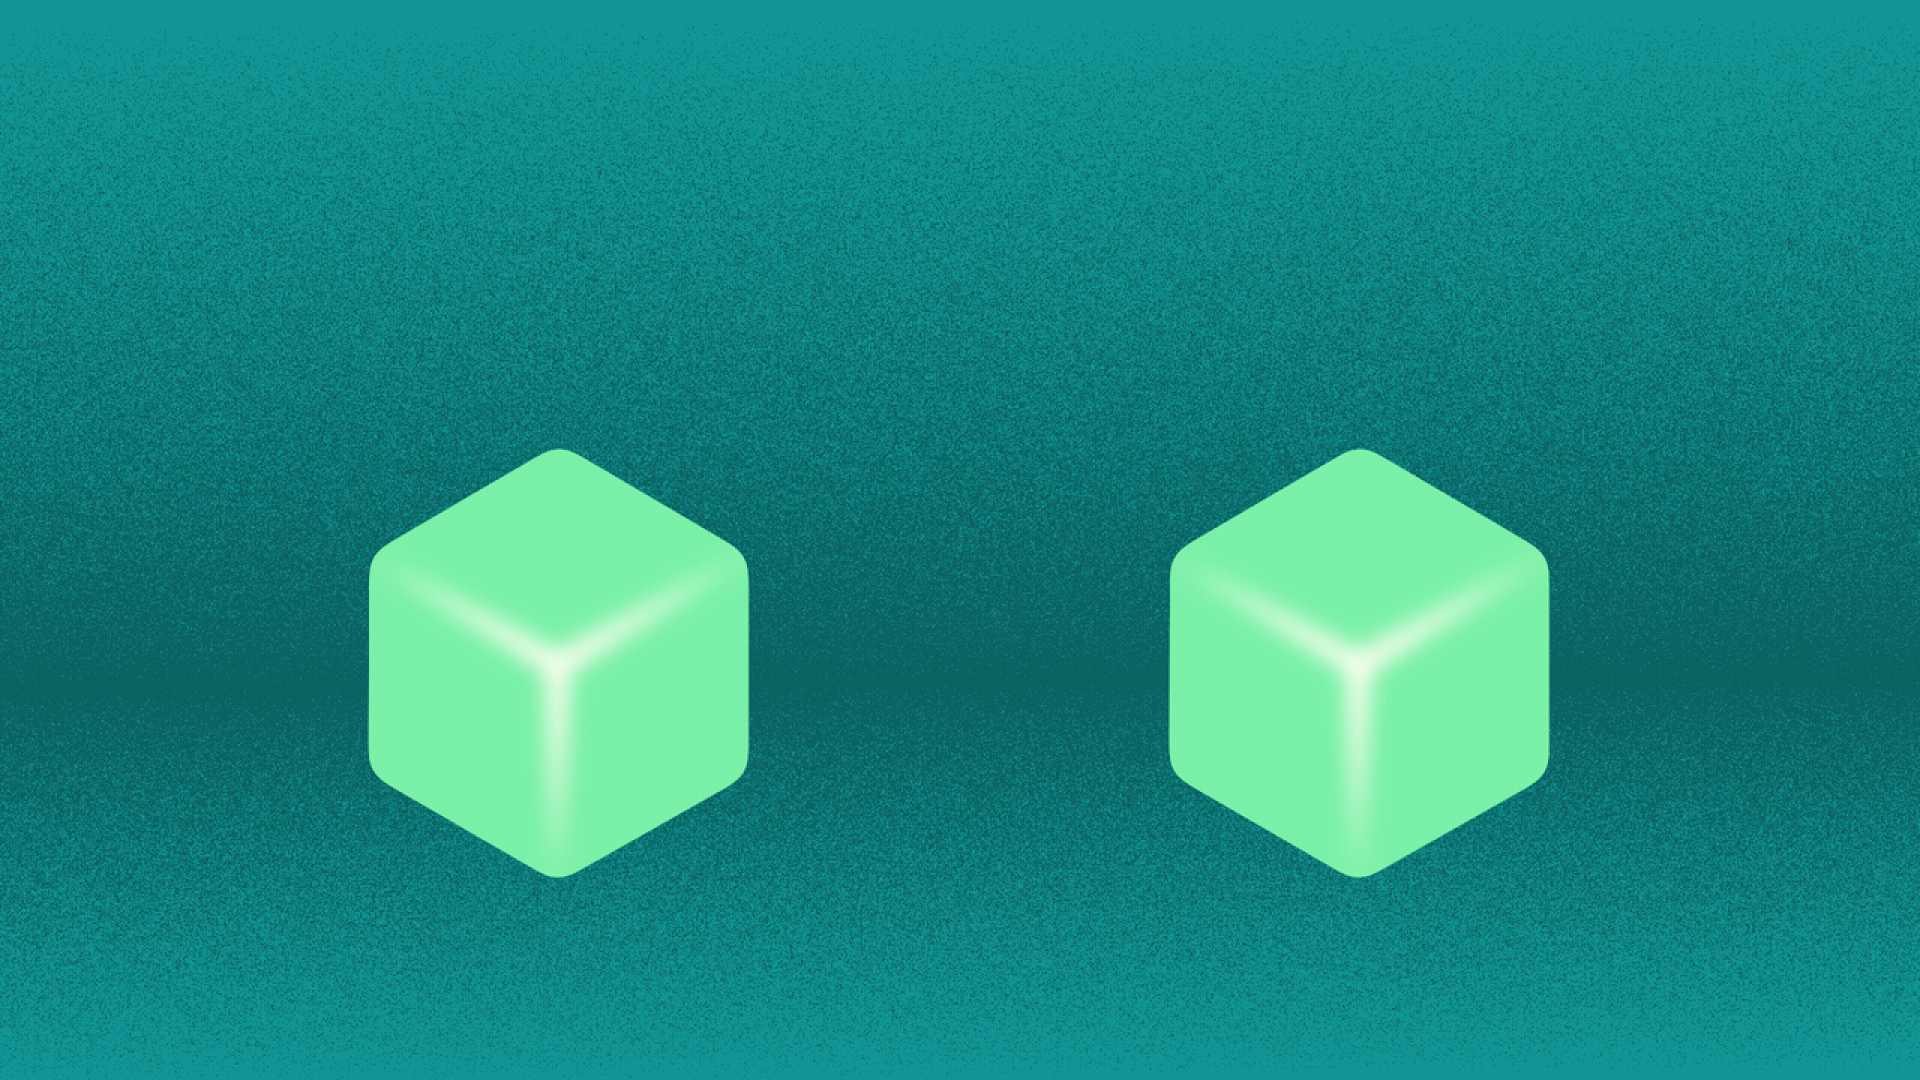 Illustration of two cubes, one of which absorbs the other.